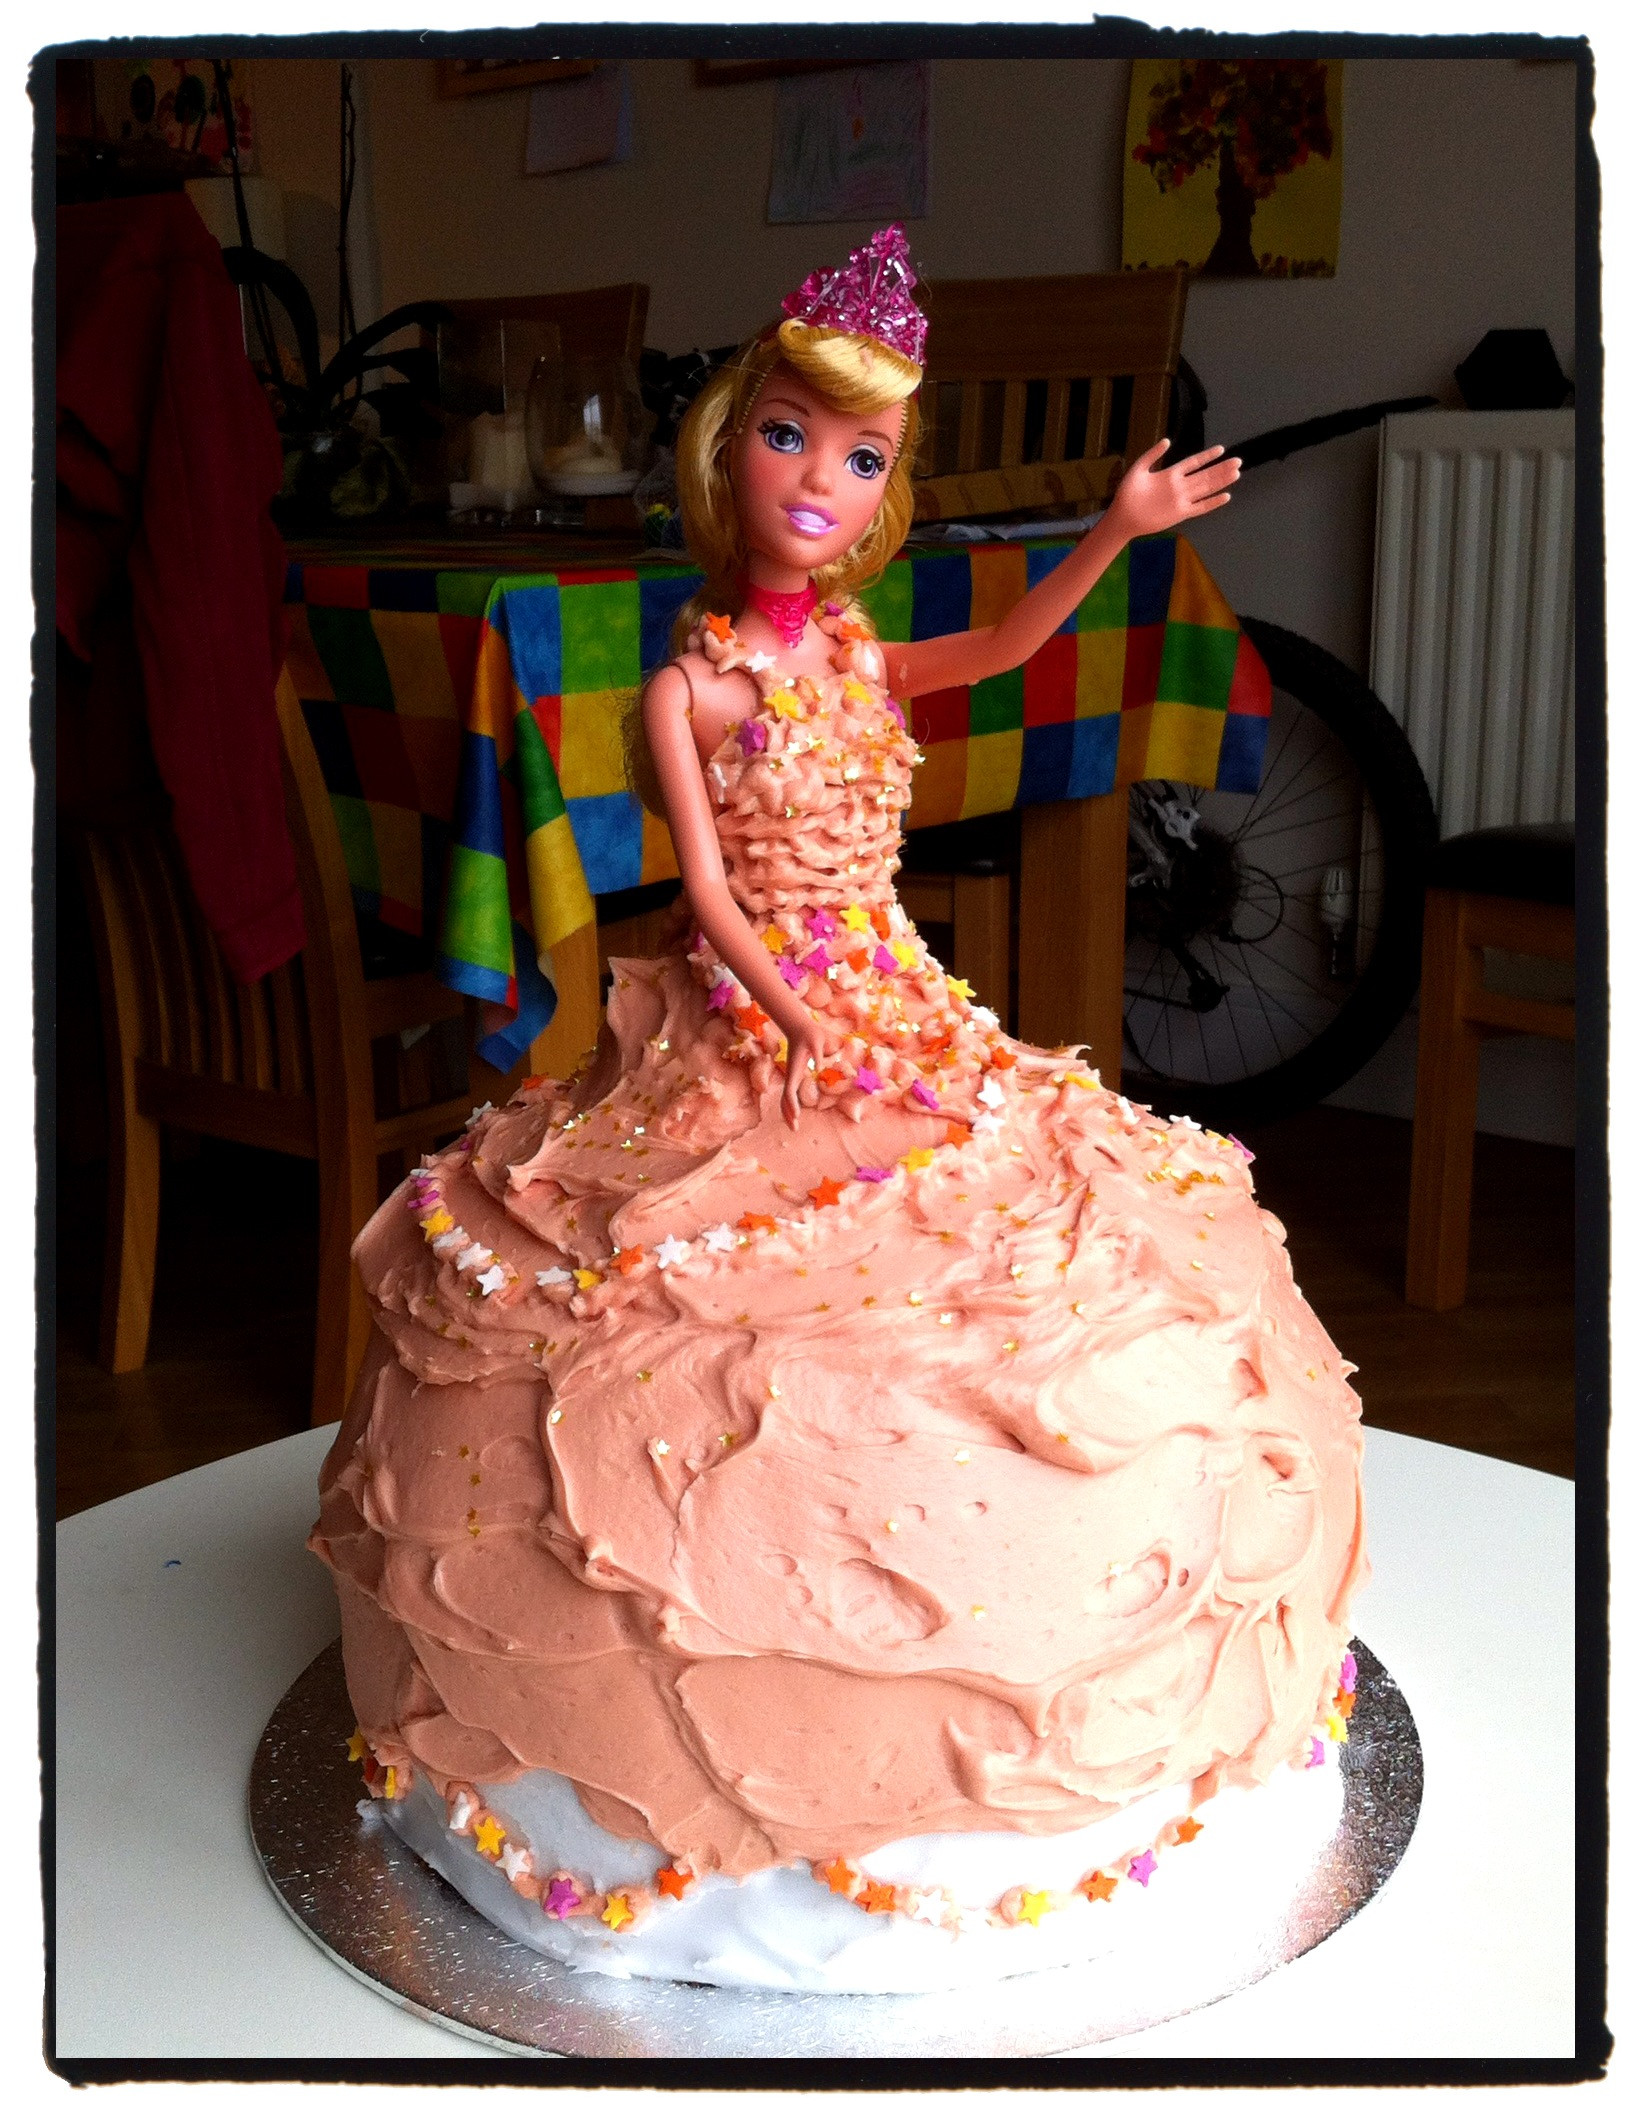 How To Make A Birthday Cake
 How to make a Princess Birthday Cake from scratch